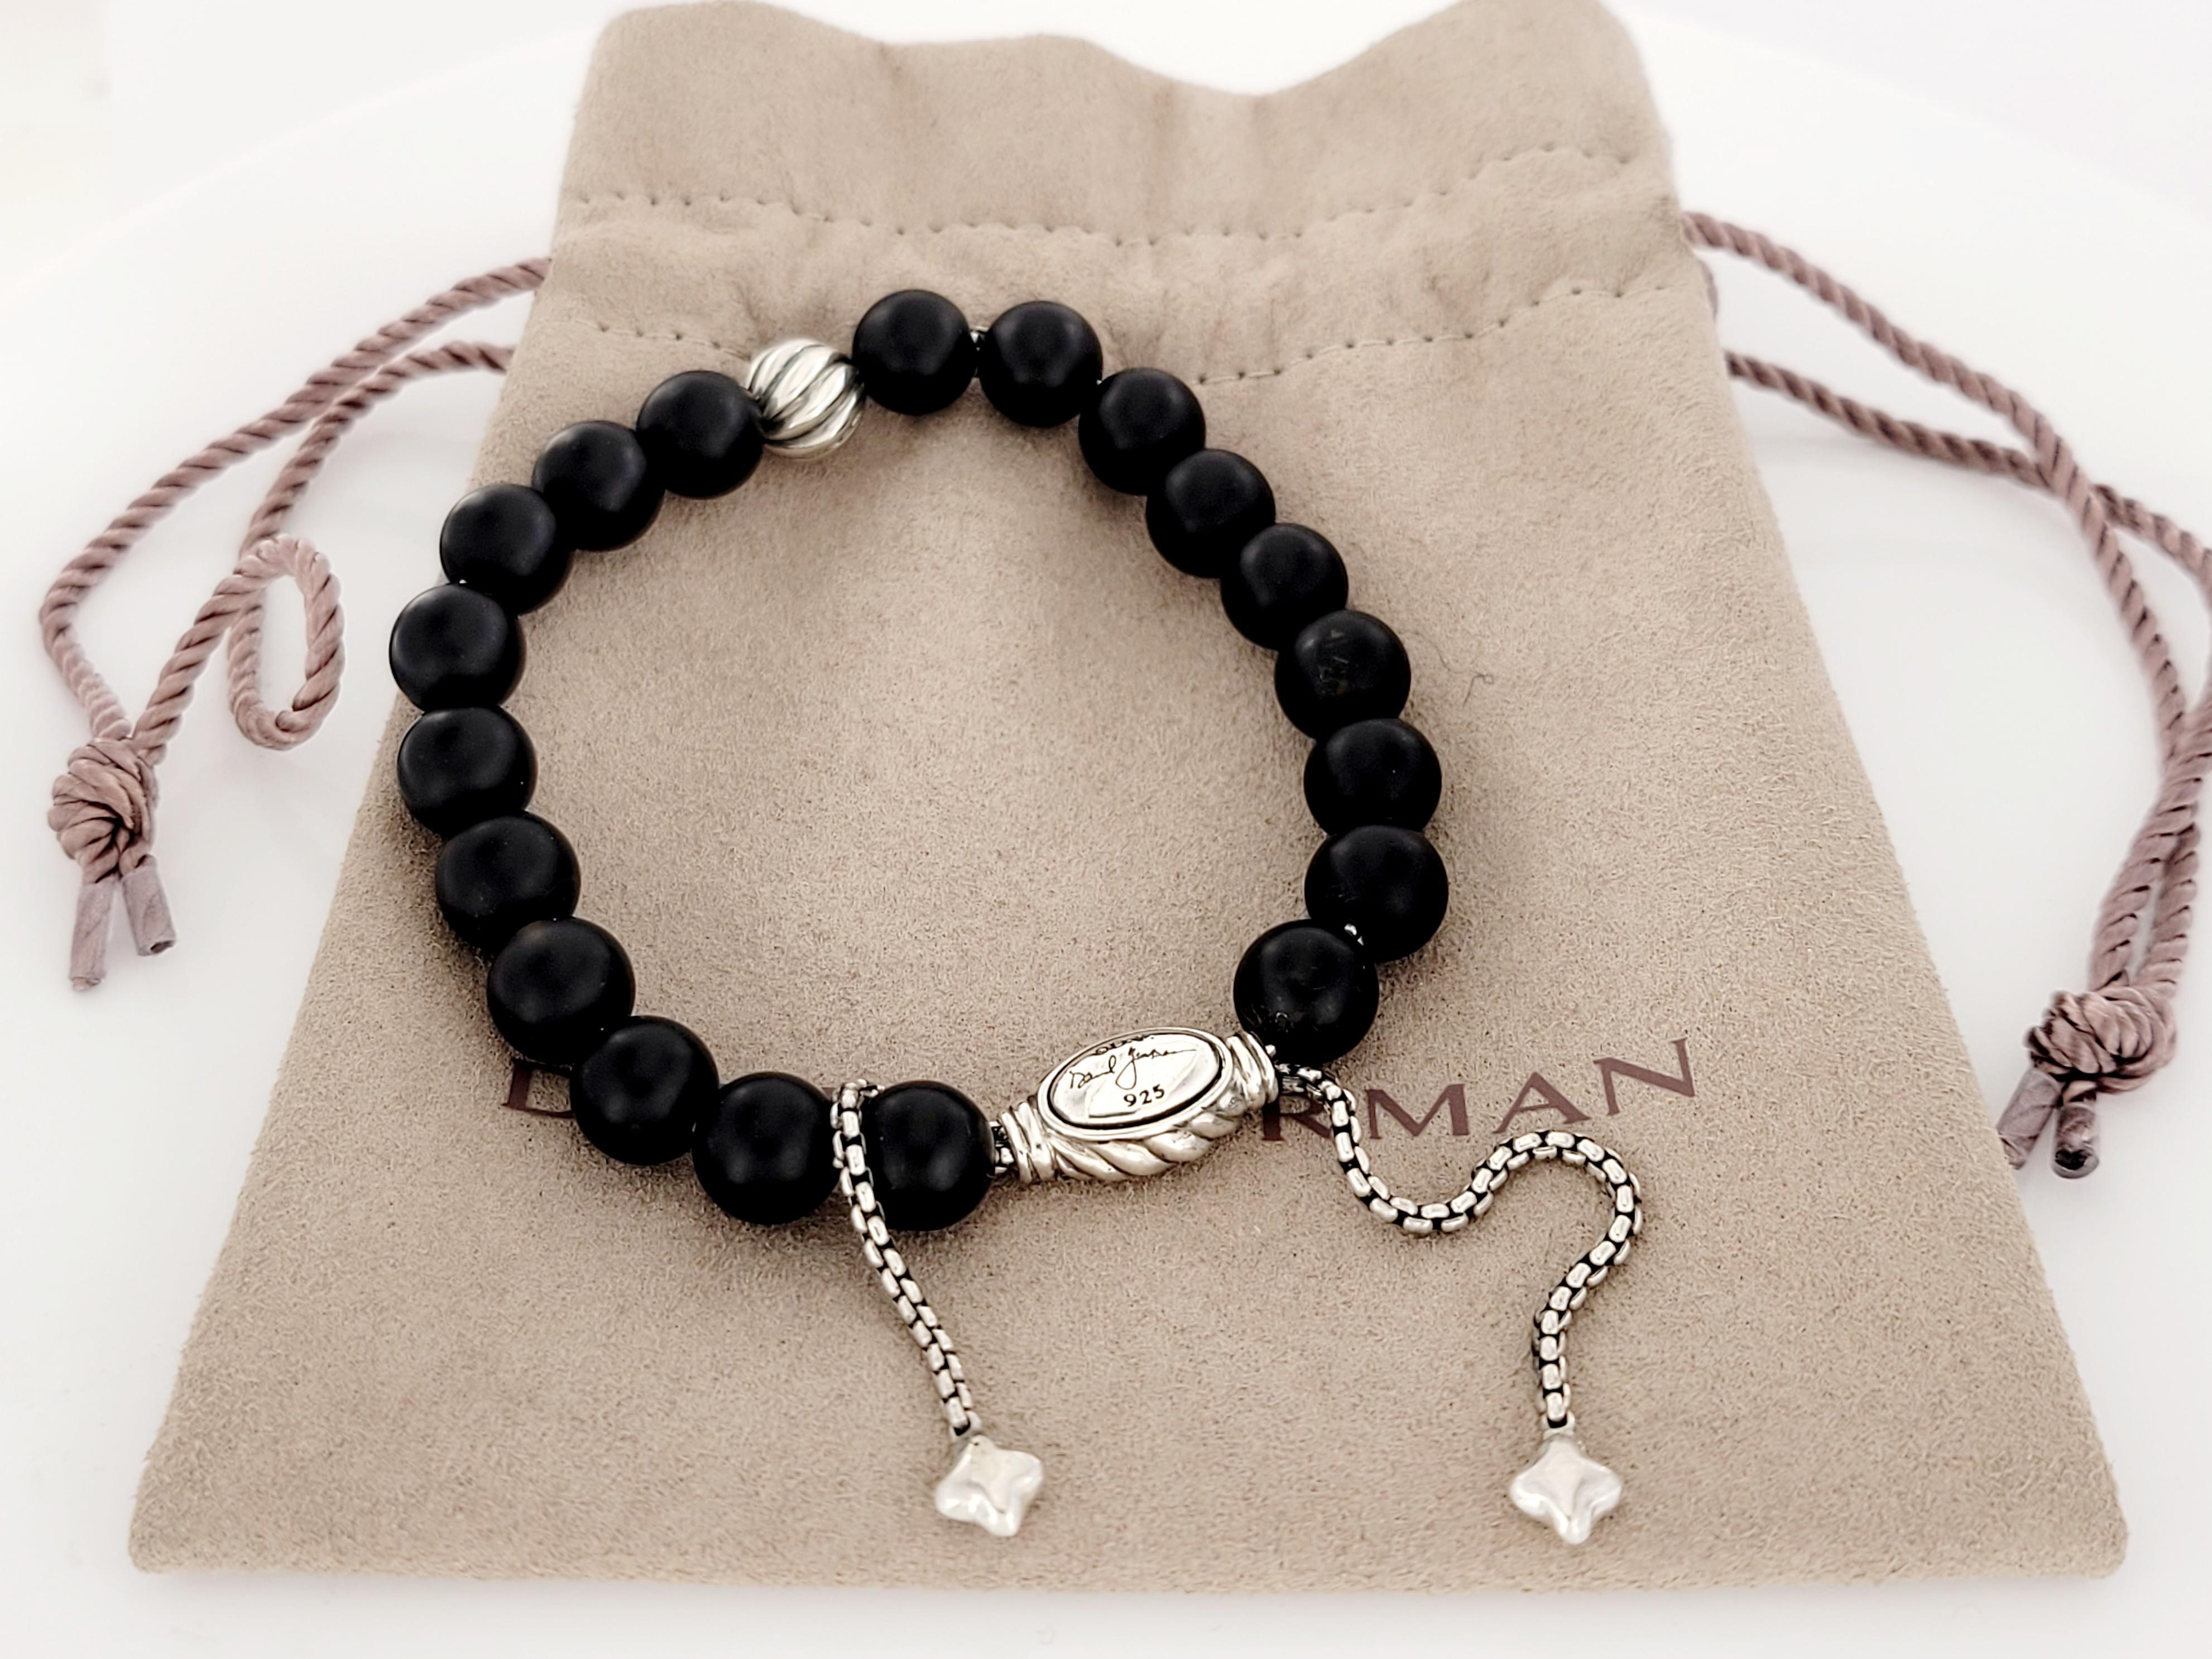 Brand David Yurman
Style: Matte black beads bracelet
Material Sterling silver 925
Bracelet width 8mm
Hallmark (C)D.Y. David Yurman 925
David Yurman Pouch included.
Perfect gift for any occasion!
Condition New Never Worn 
Retail Price:$450